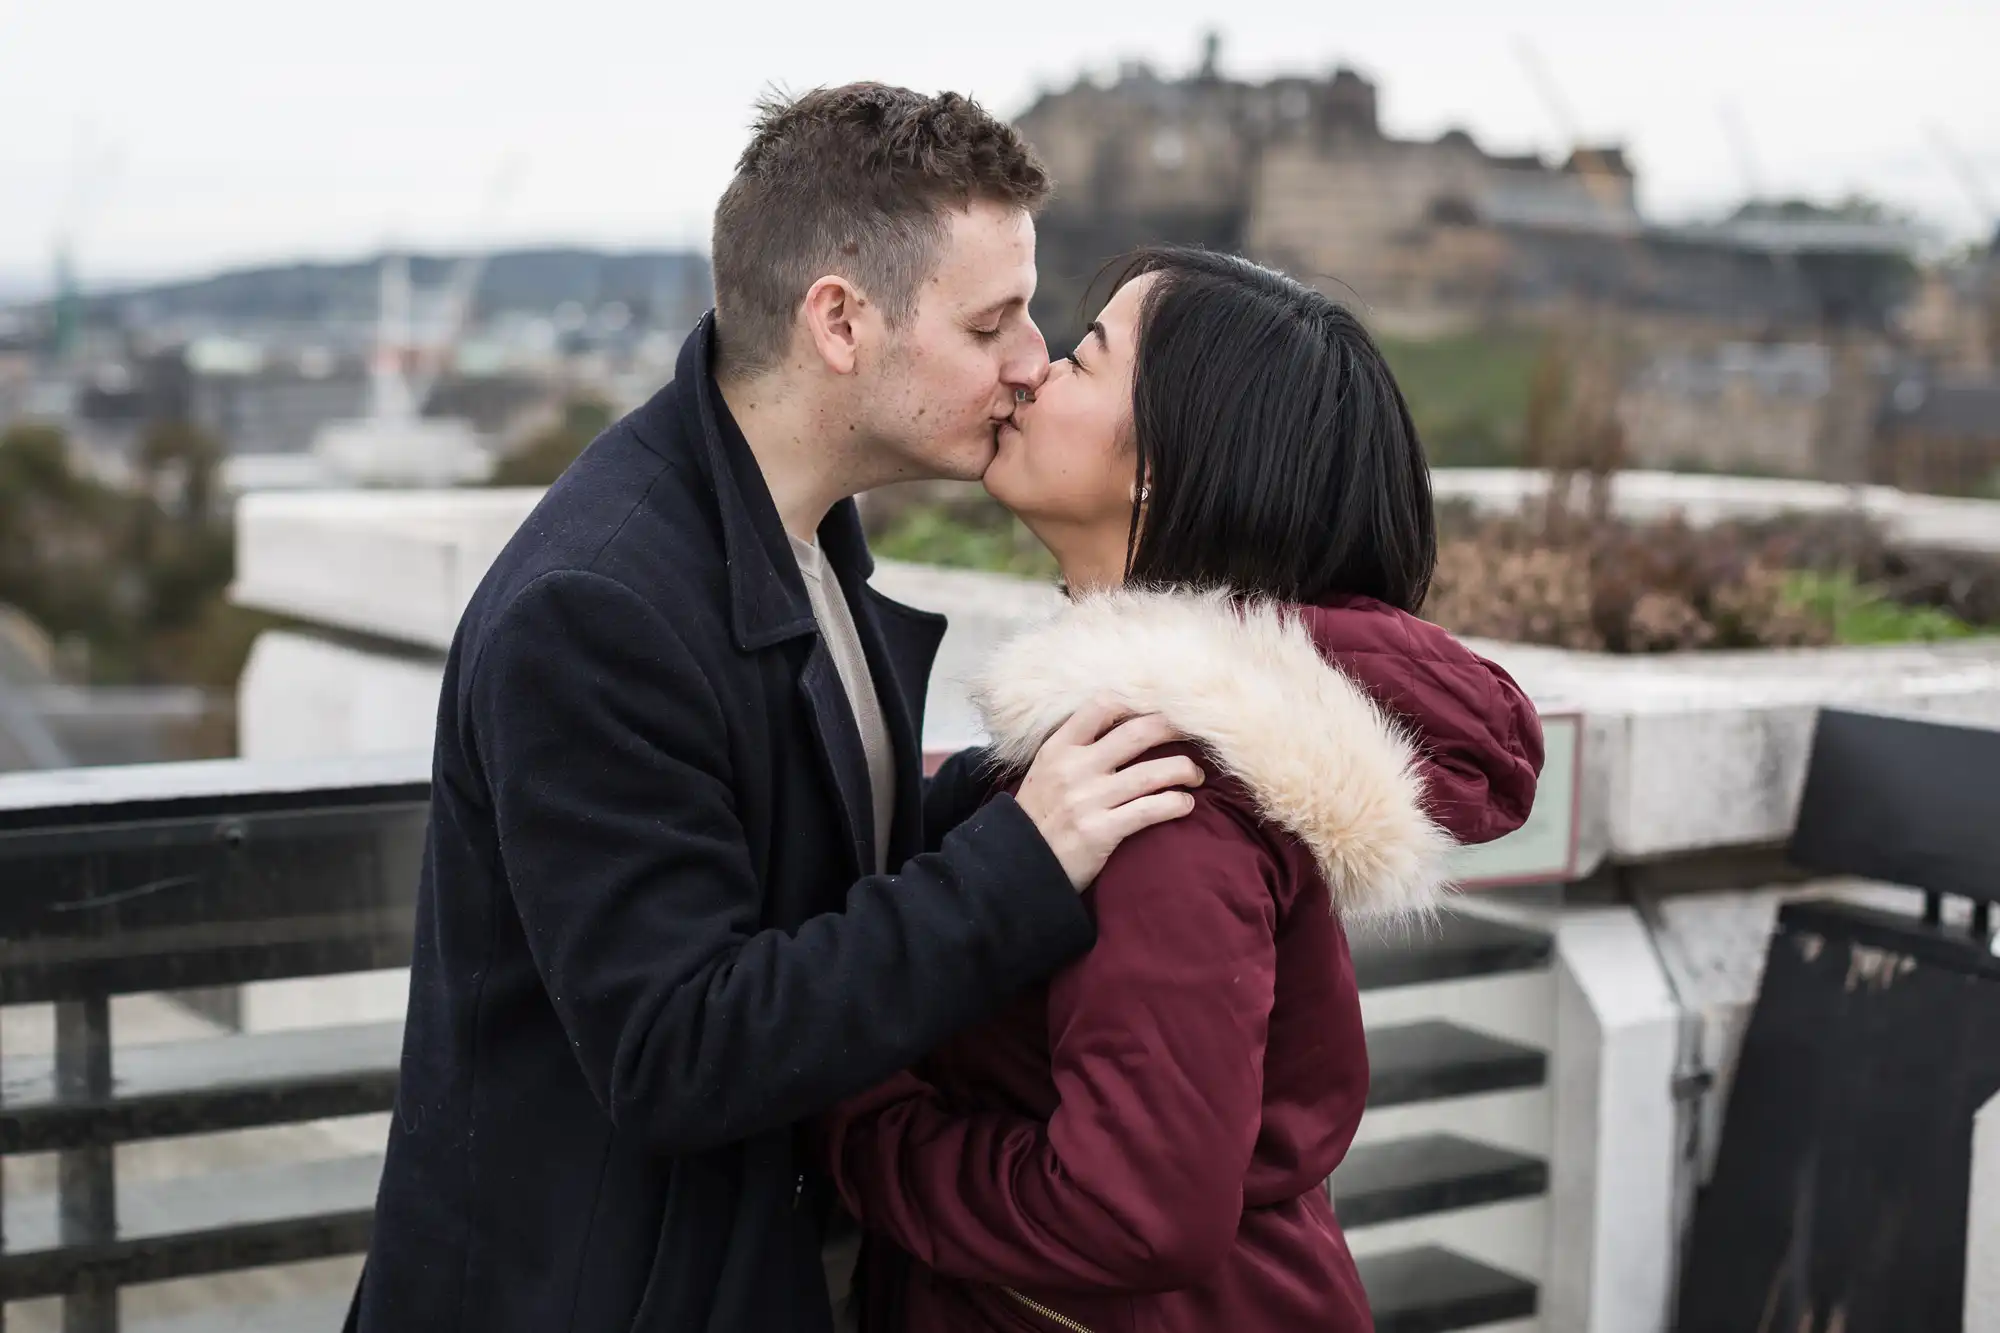 A couple kissing on a rooftop with a blurred cityscape and castle in the background.